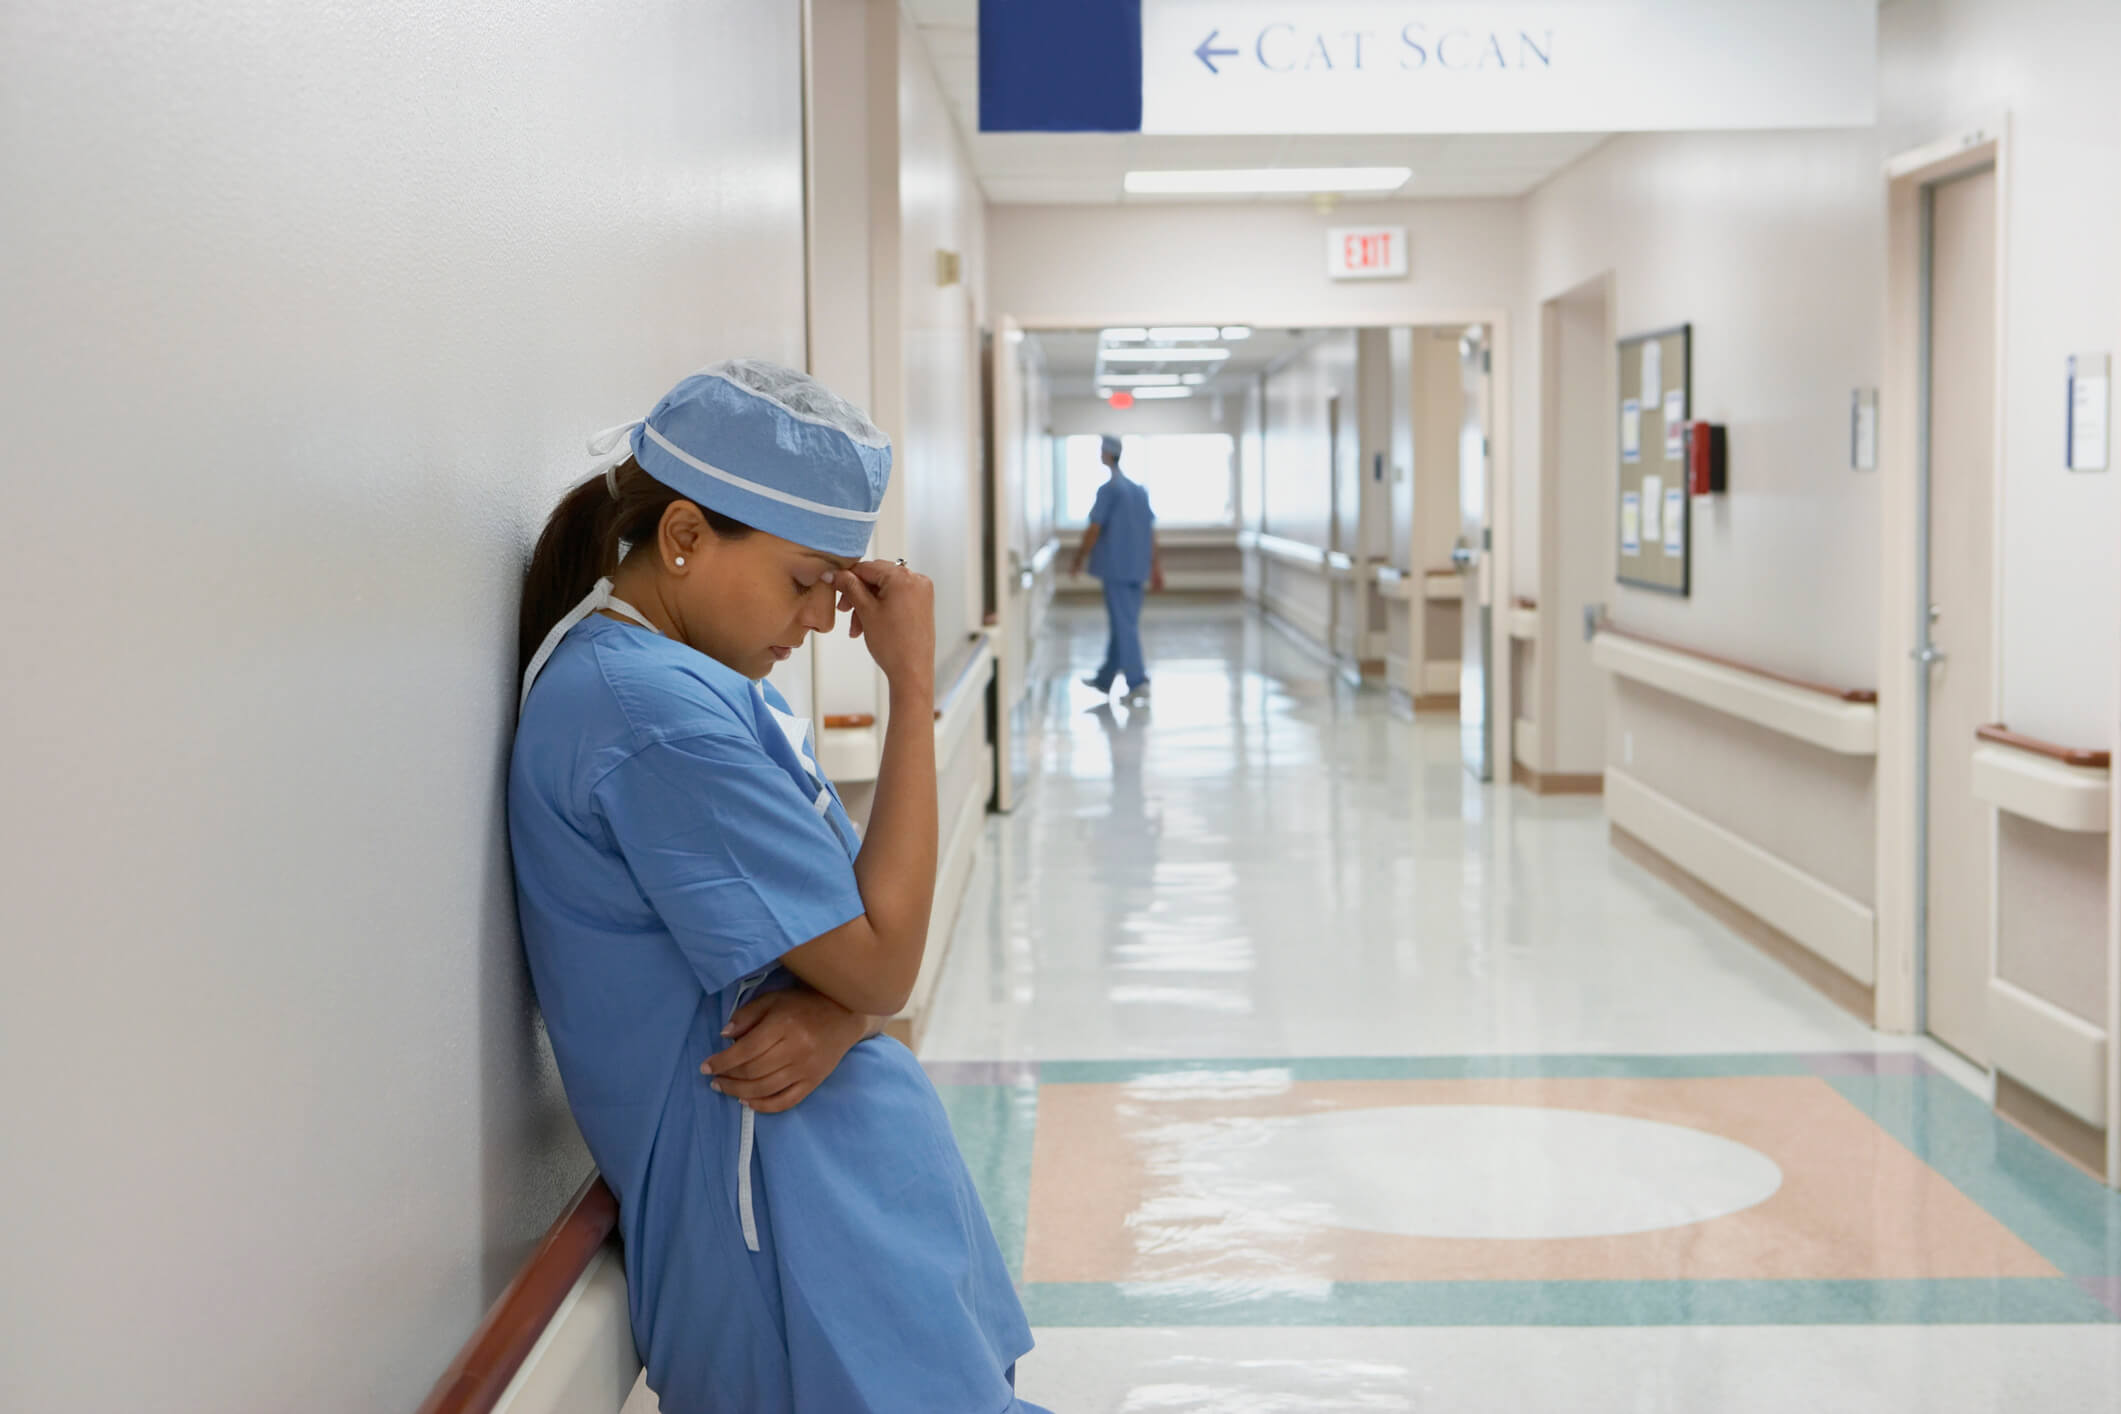 A stressed female nurse leans against a wall in a hospital hallway. Her right hand is pressed against her forehead temple, and her eyes are closed.